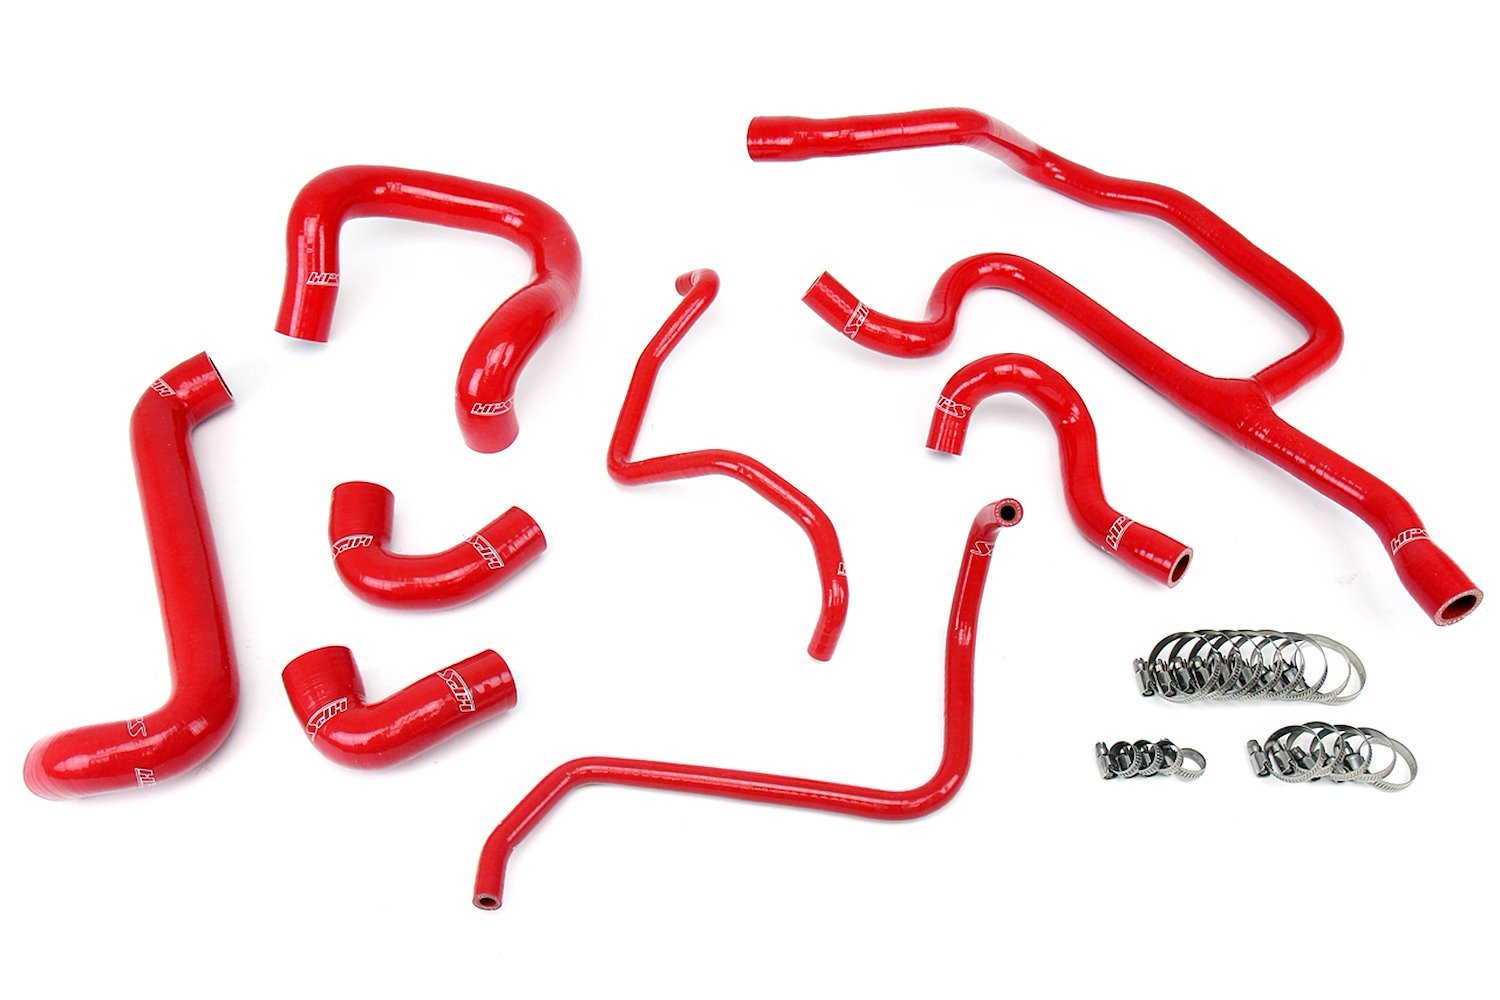 57-1427-RED Coolant Hose Kit, High-Temp 3-Ply Reinforced Silicone, Replace Rubber Radiator Heater Coolant Hoses